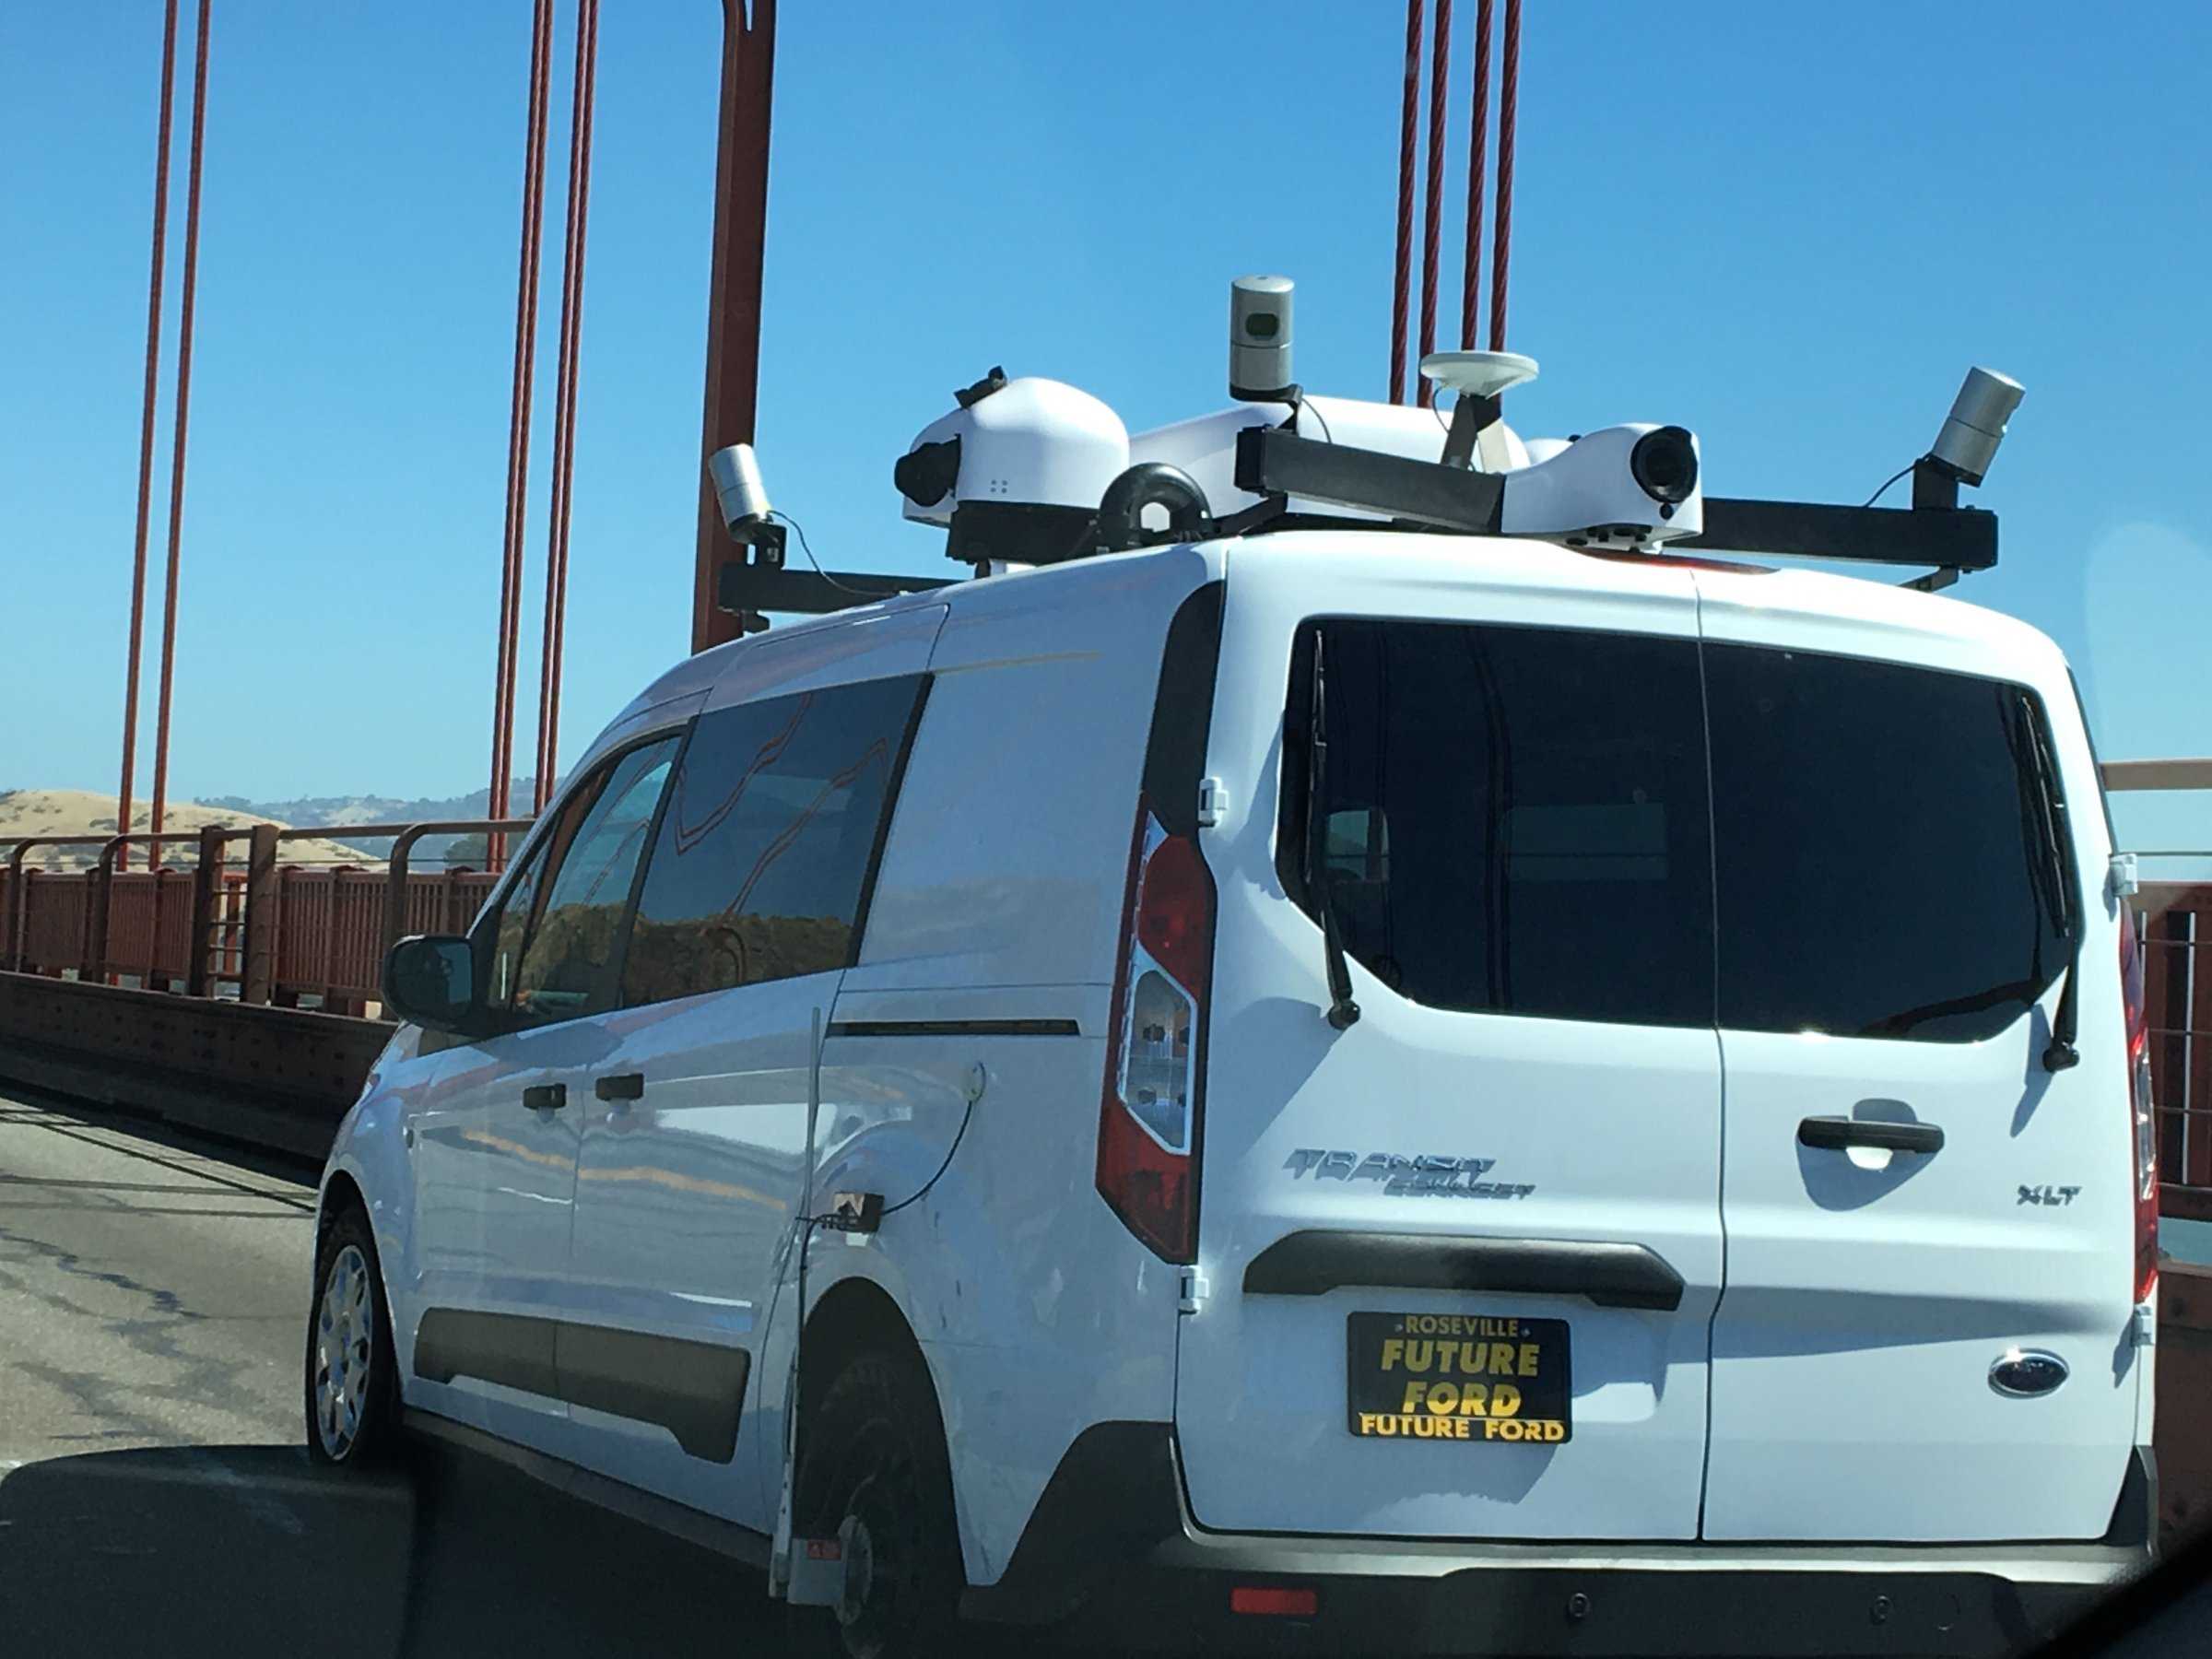 This mystery van is likely making detailed 'point cloud' maps for autonomous vehicles.